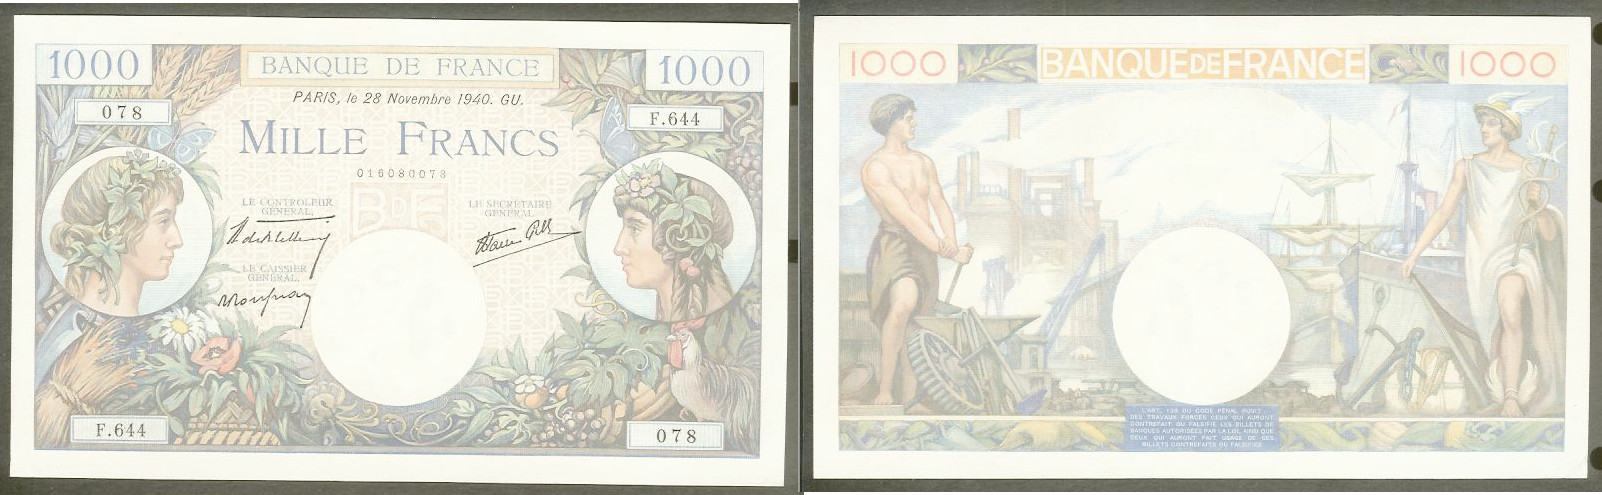 1000 francs Commerce and Industry 28.11.1940 Unc